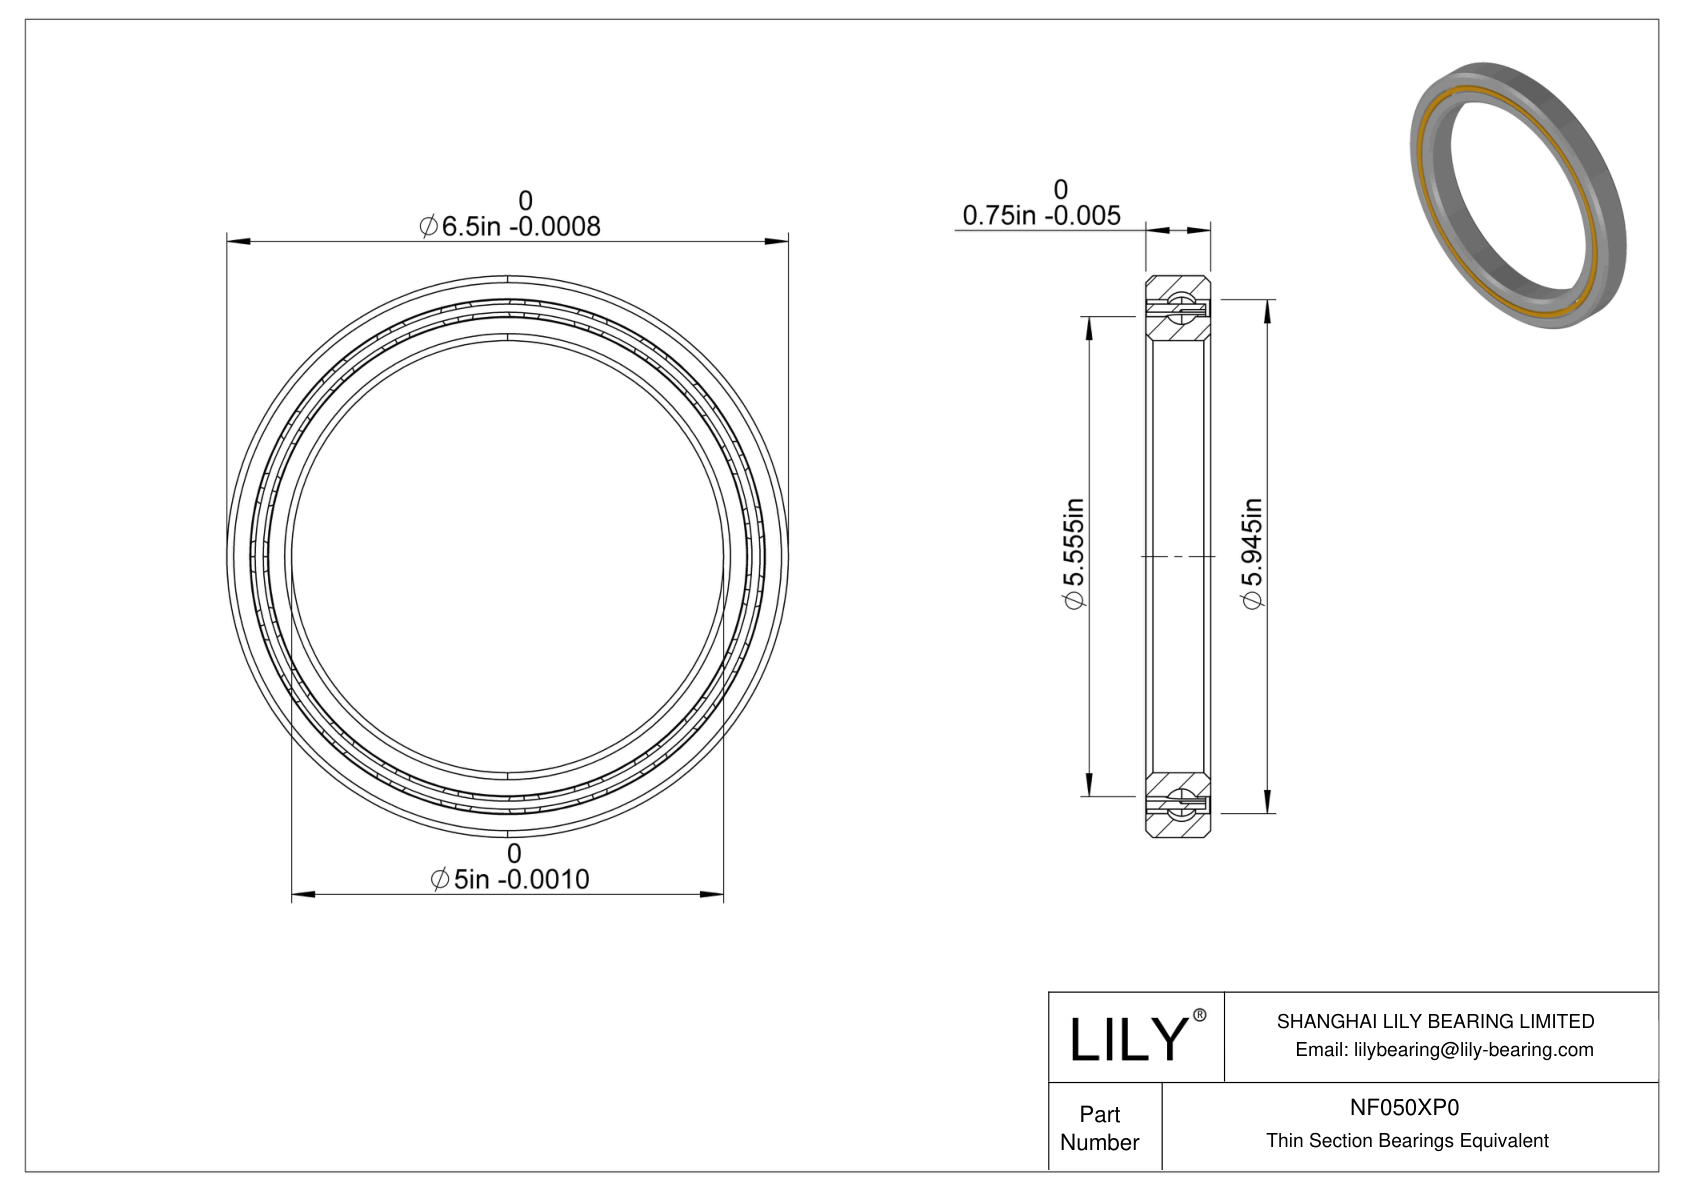 NF050XP0 Constant Section (CS) Bearings cad drawing